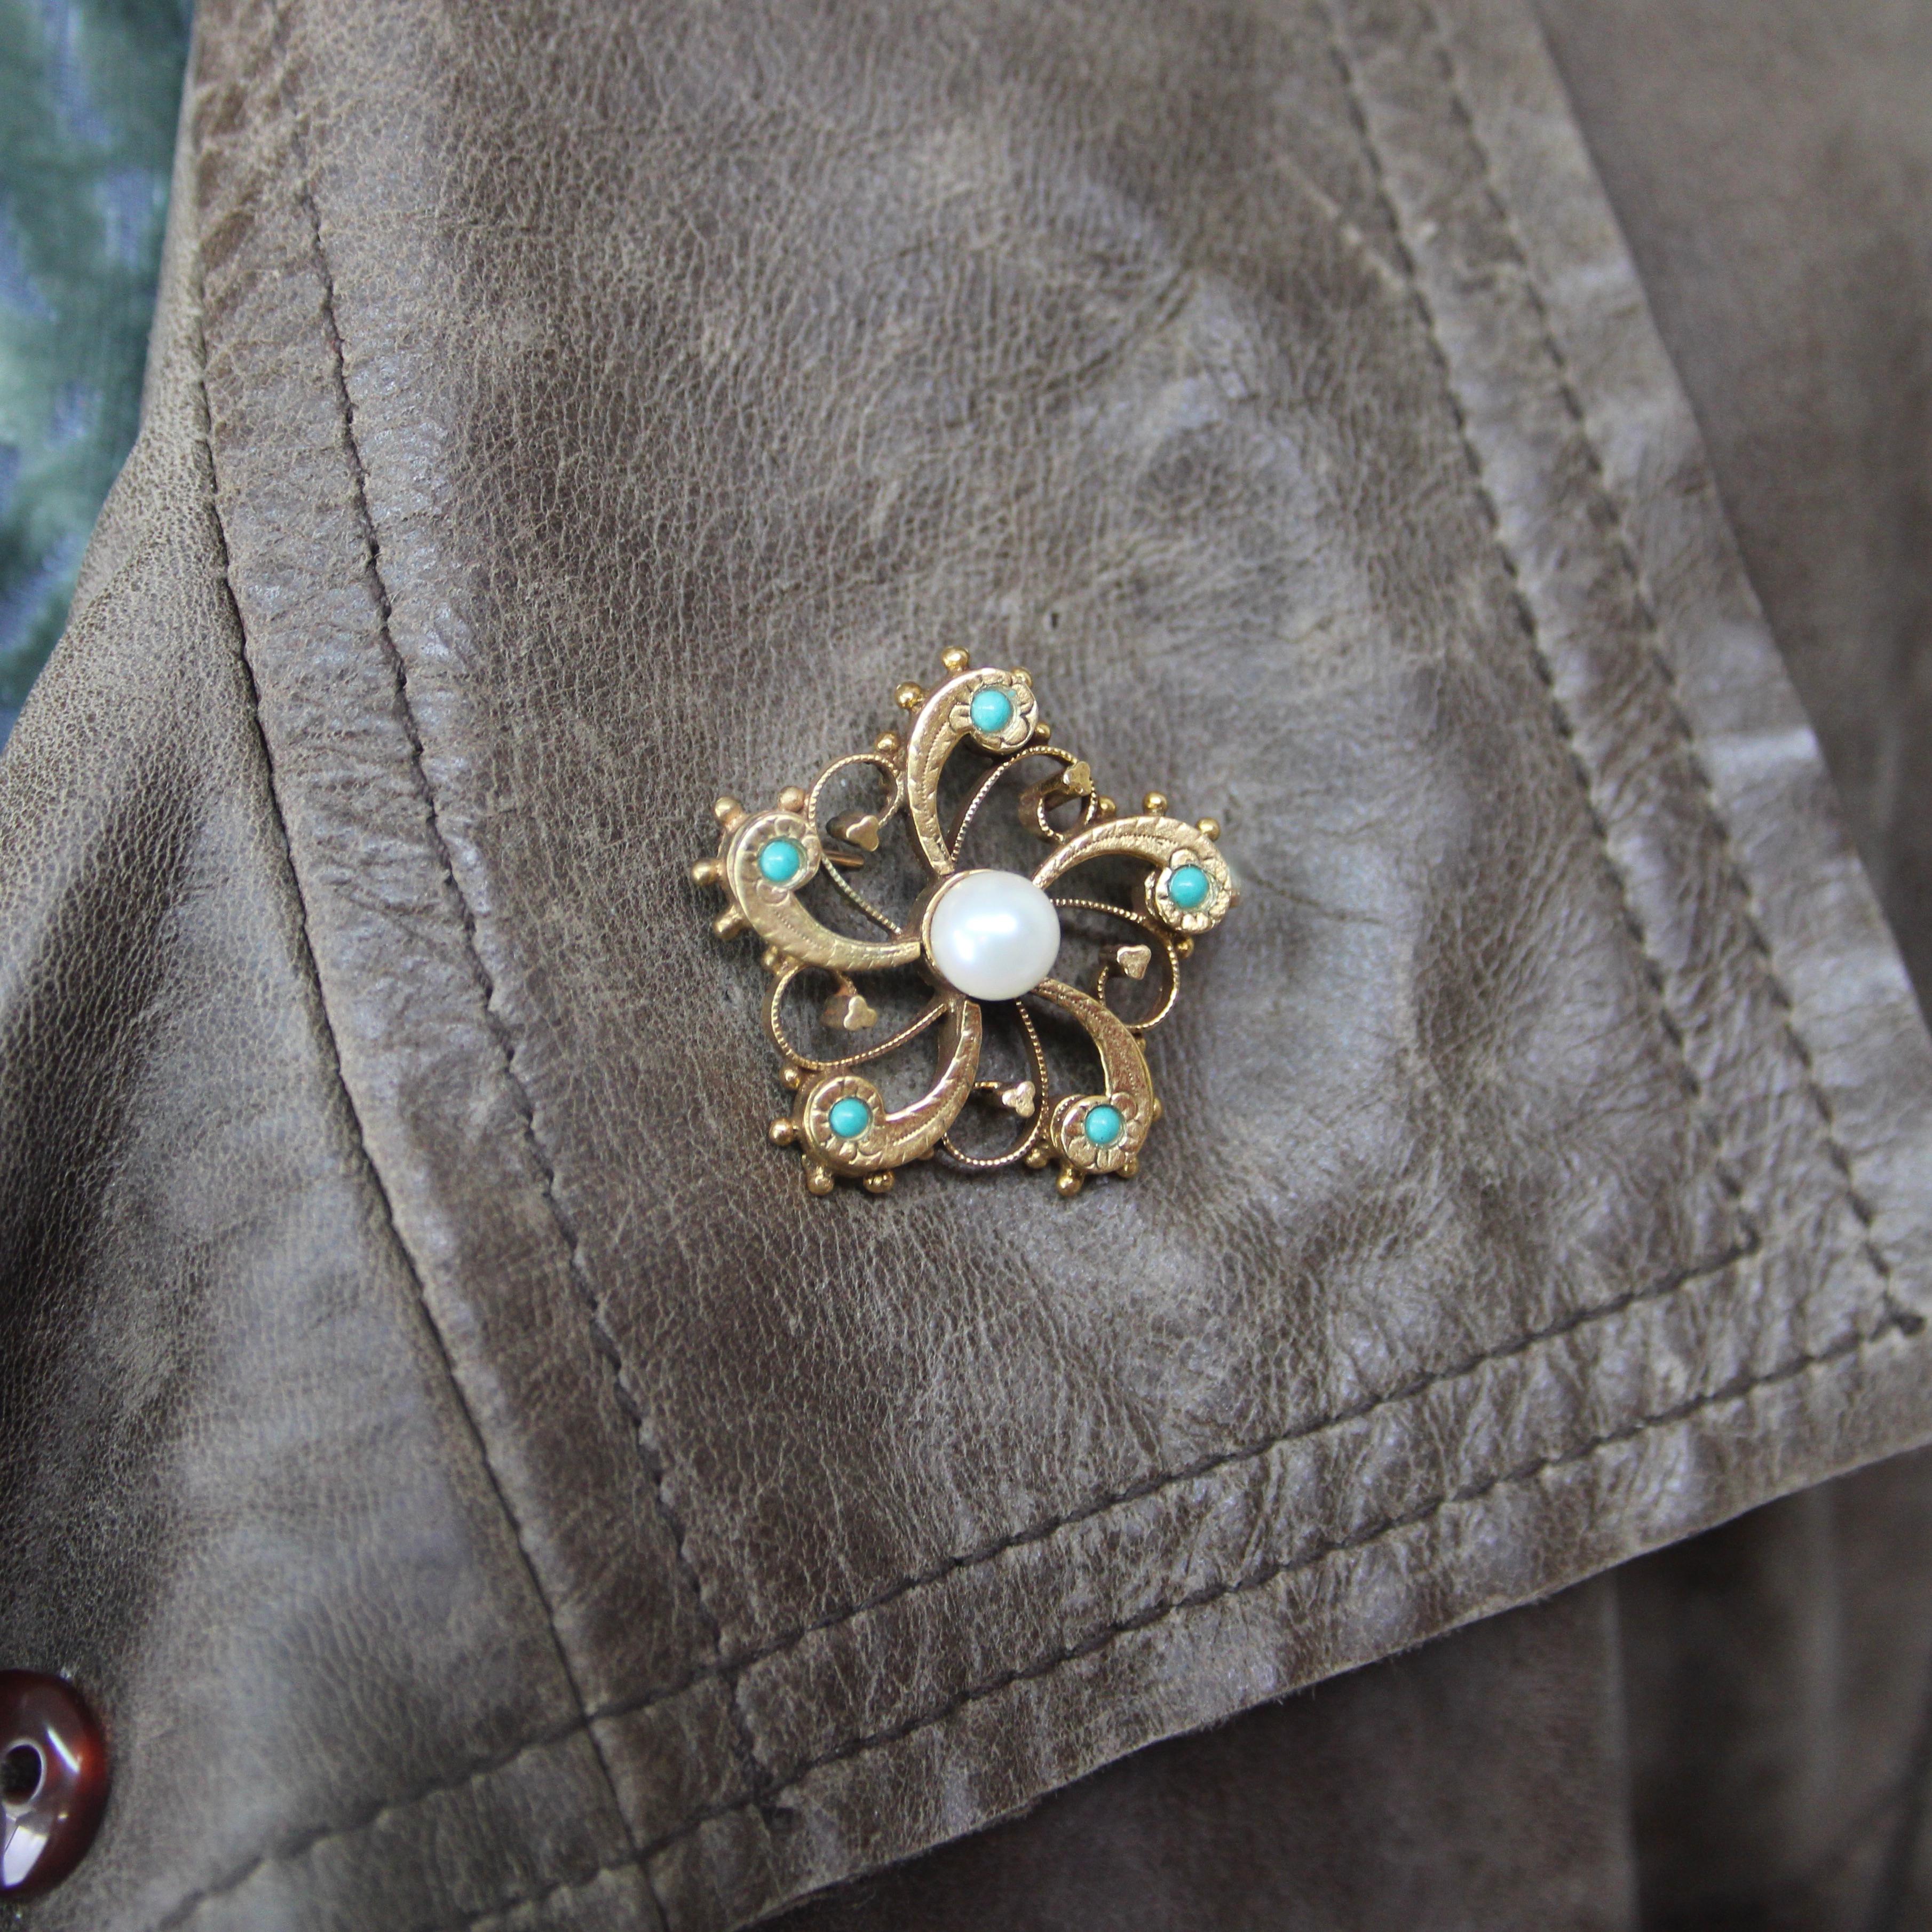 This 14k gold Victorian pin has an undulating flower form with curved petals that spiral like a sea anemone. Floral and oceanic, the pin has an organic quality to it that seems simple at first but draws in the eye to reveal the design’s intricacies.